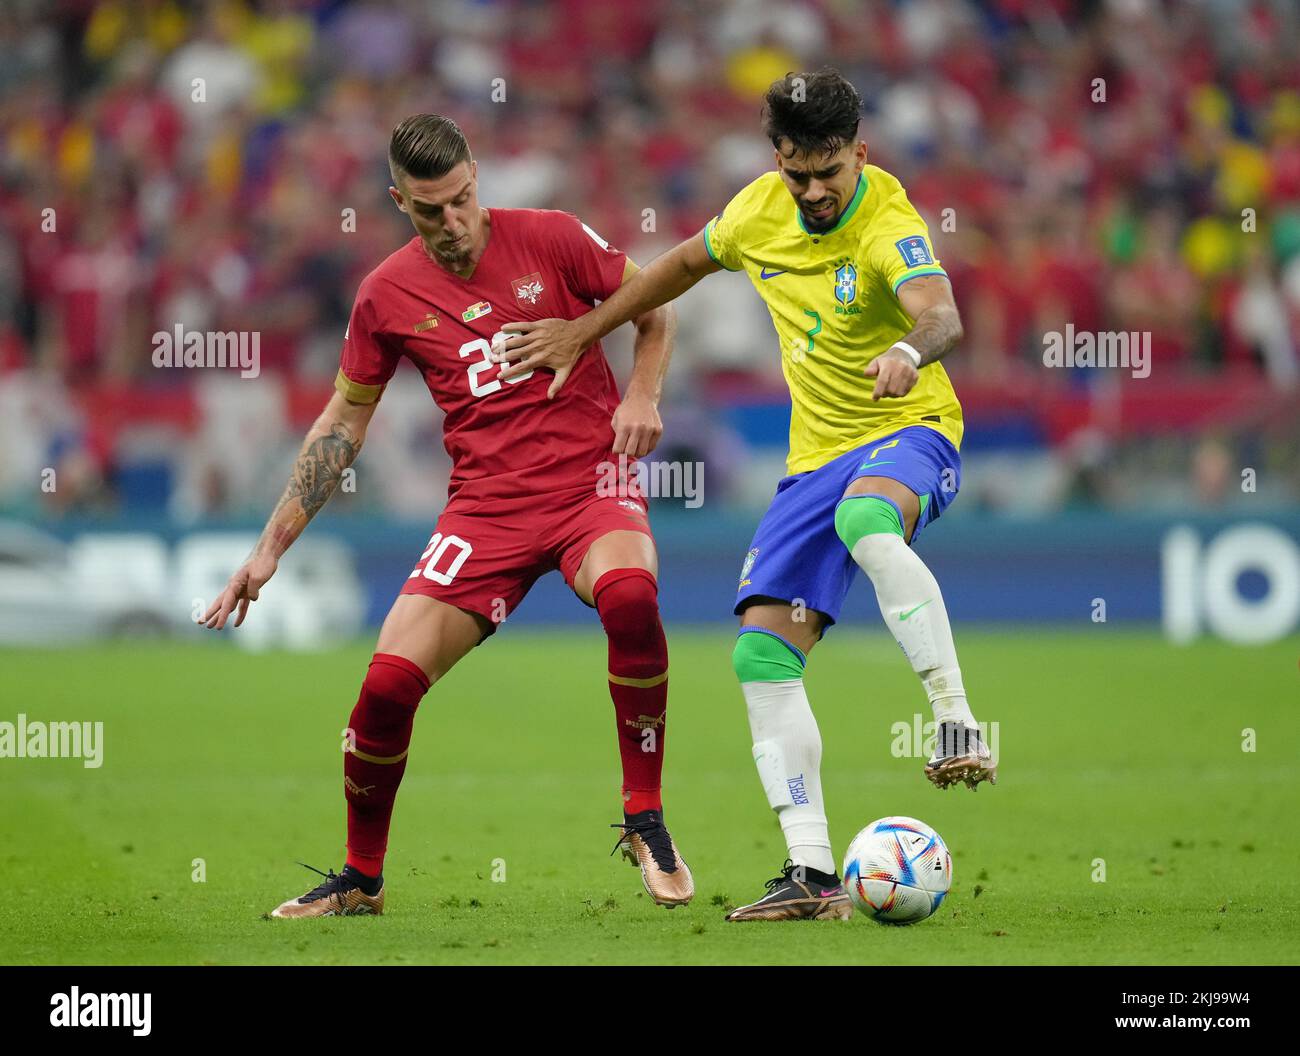 Serbia's Sergej Milinkovic-Savic (left) and Brazil's Lucas Paqueta battle for the ball during the FIFA World Cup Group G match at the Lusail Stadium in Lusail, Qatar. Picture date: Thursday November 24, 2022. Stock Photo